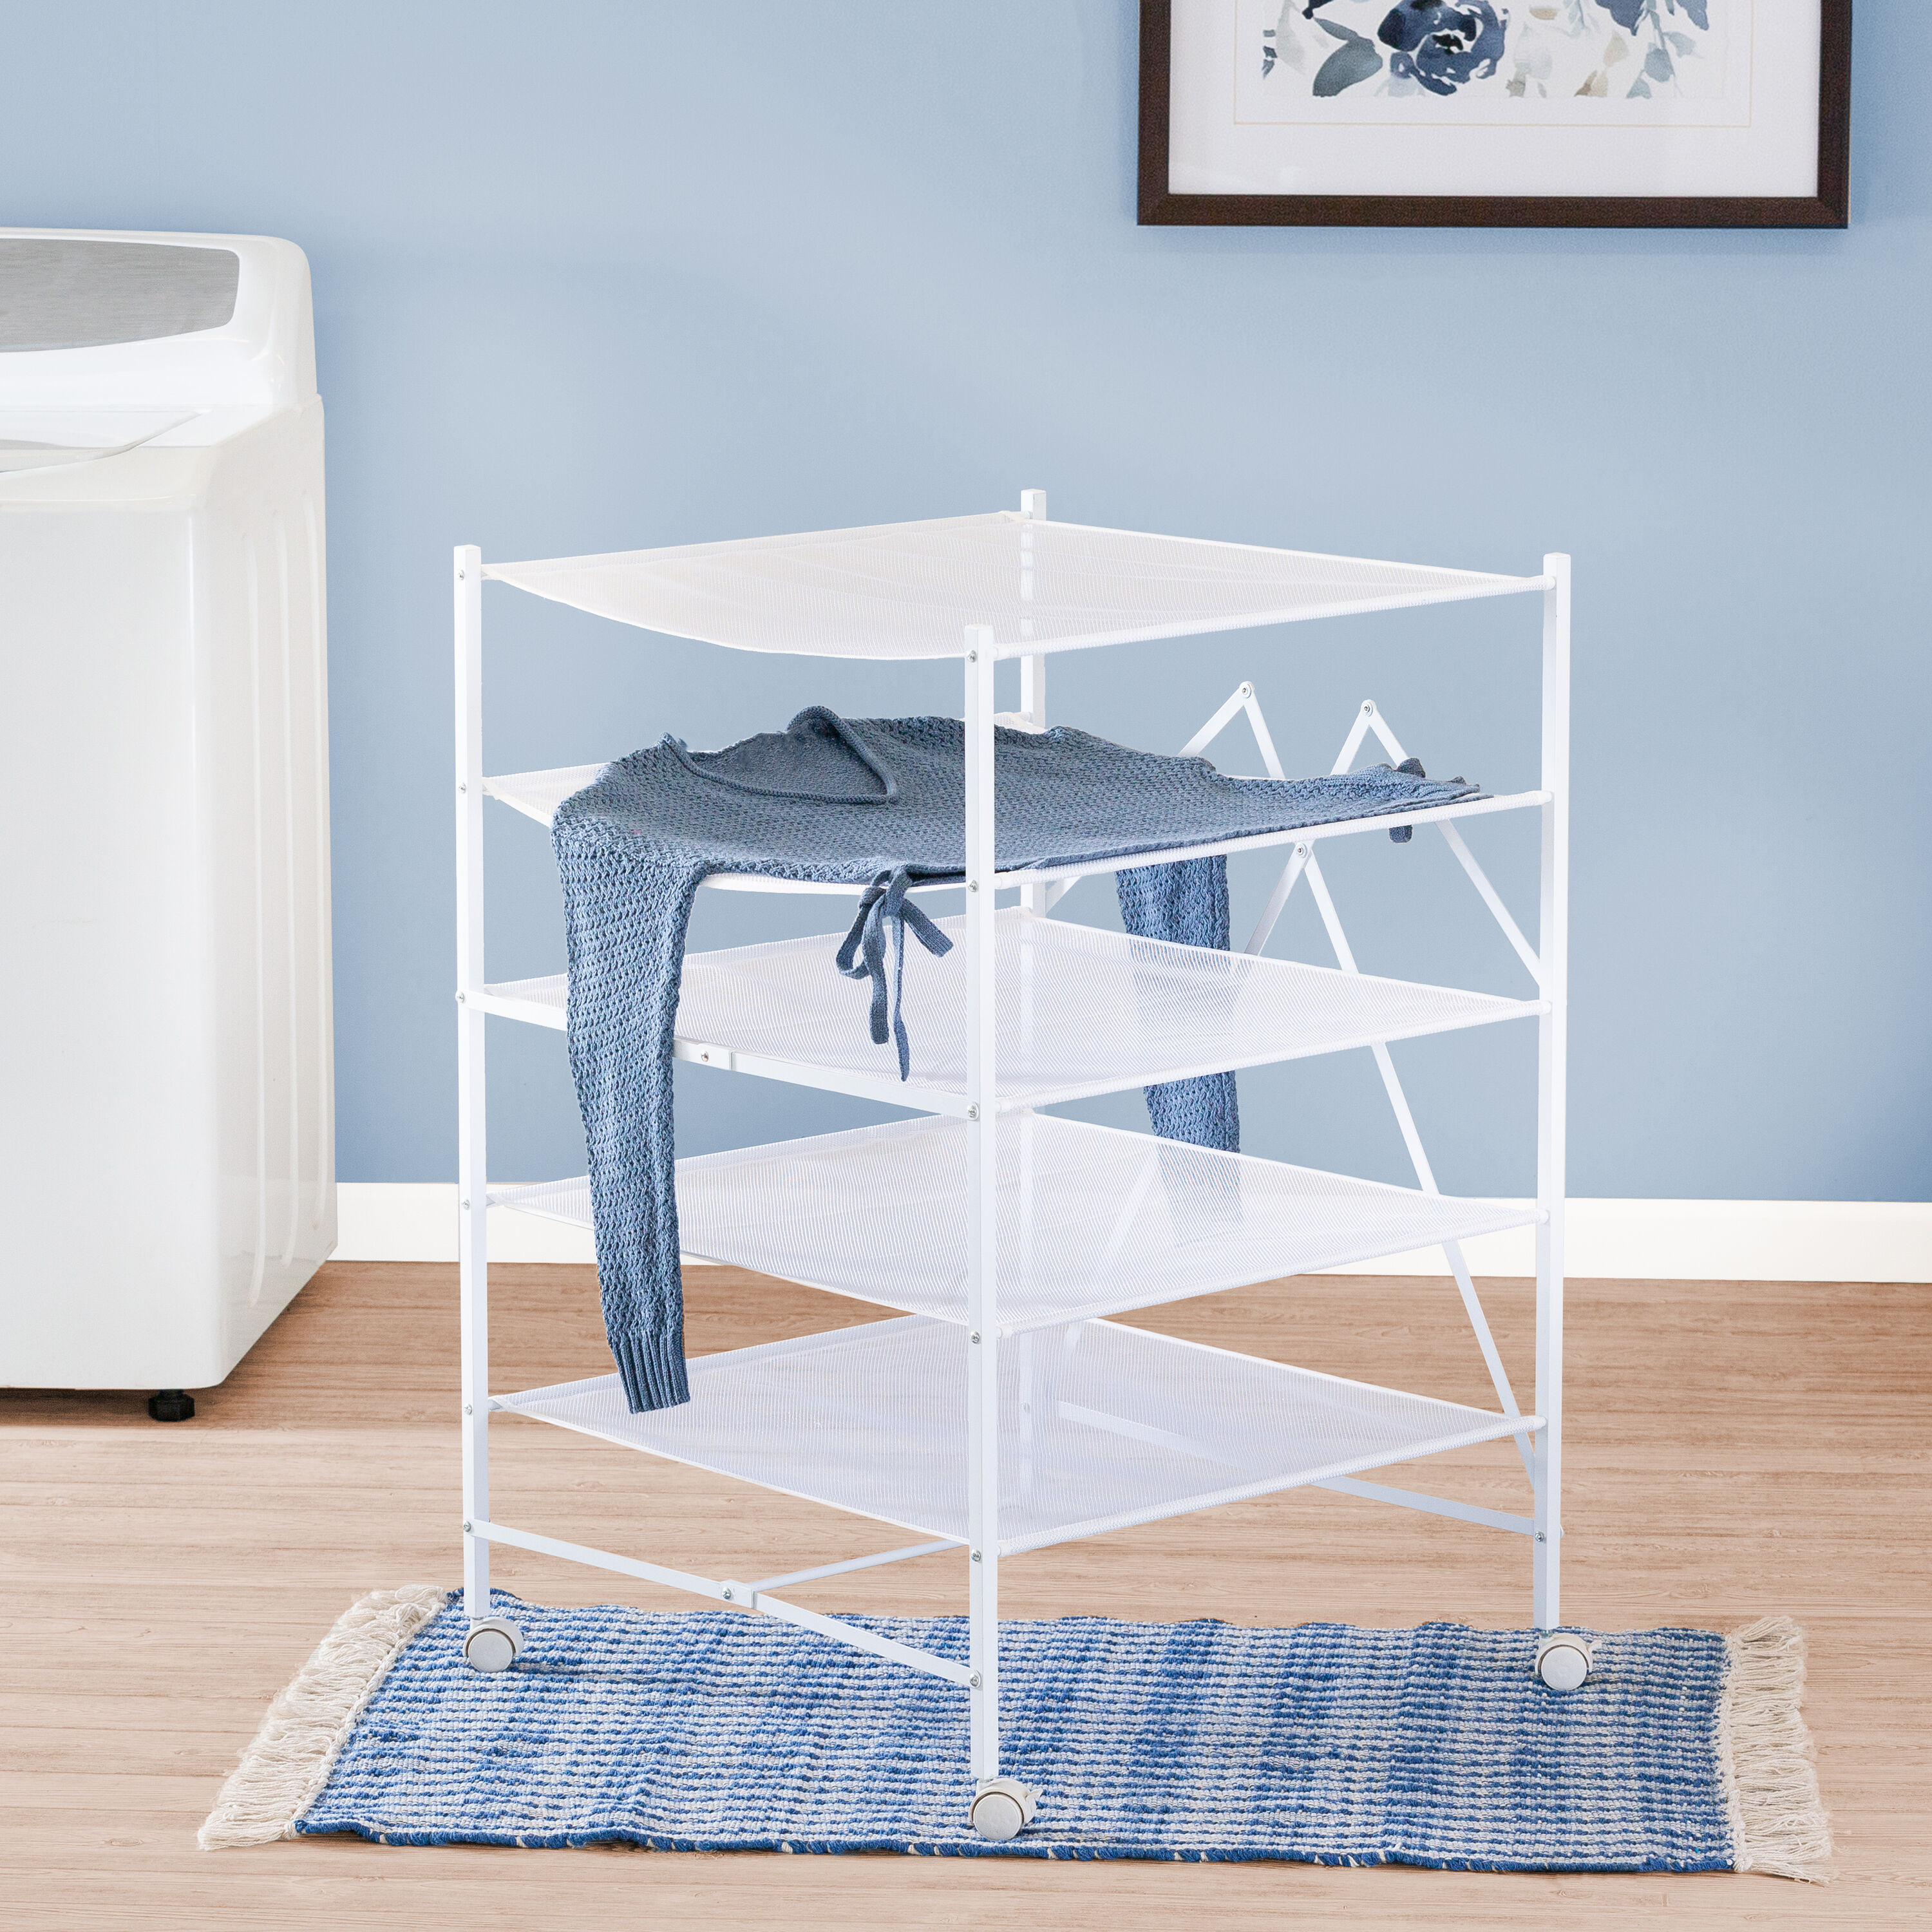 Honey-Can-Do 1-Tier 18.5-in Metal Drying Rack in the Clotheslines